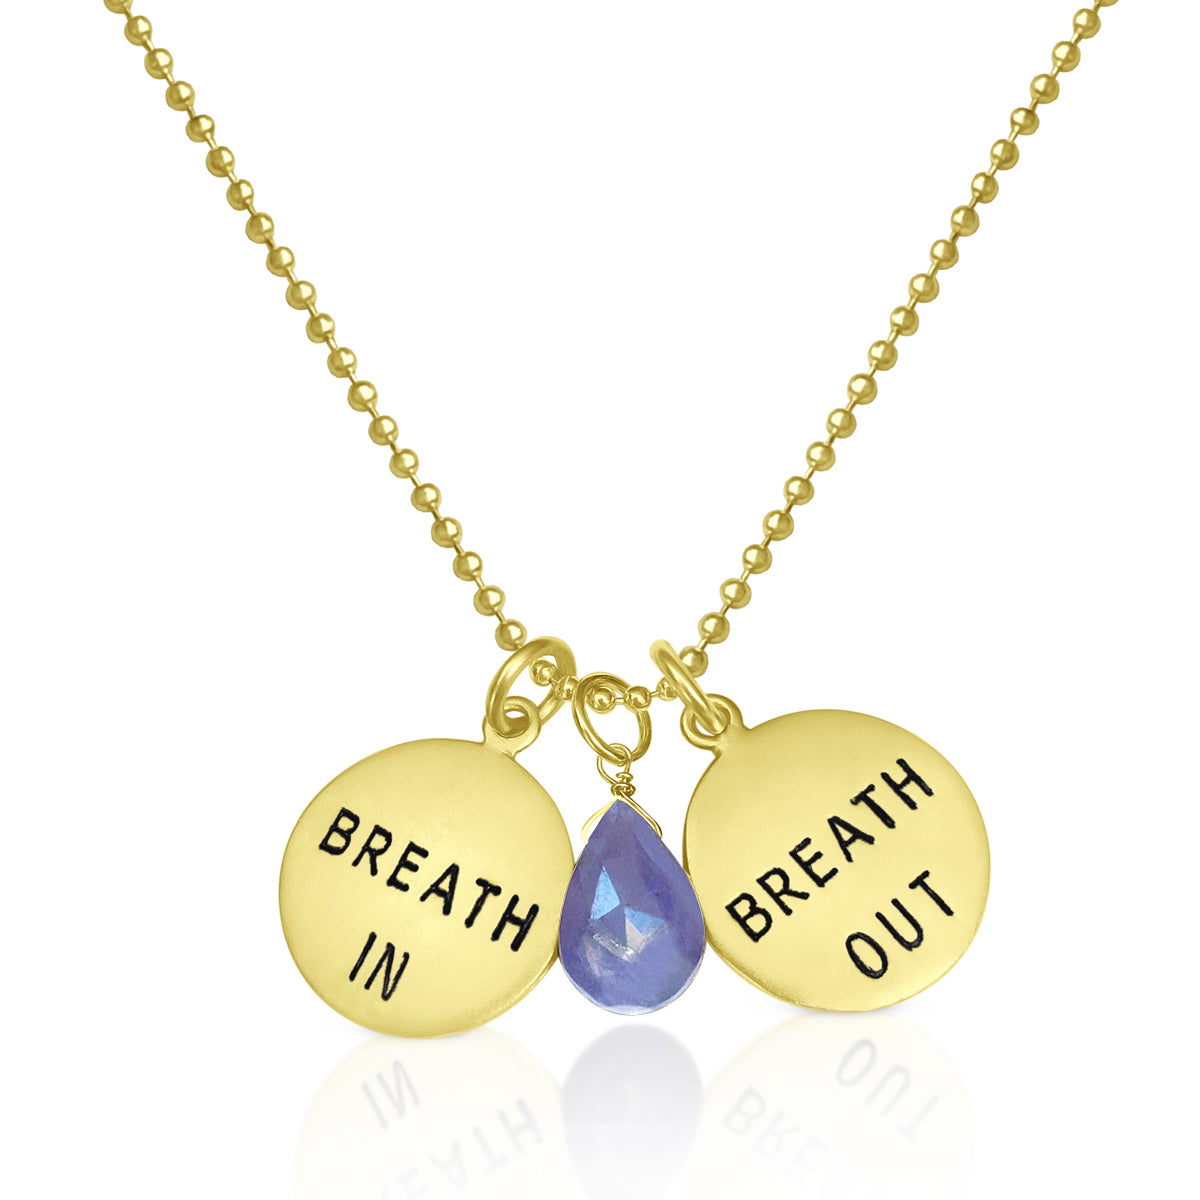 Breath In - Breath Out Necklace with Tanzanite to Celebrate Individuality